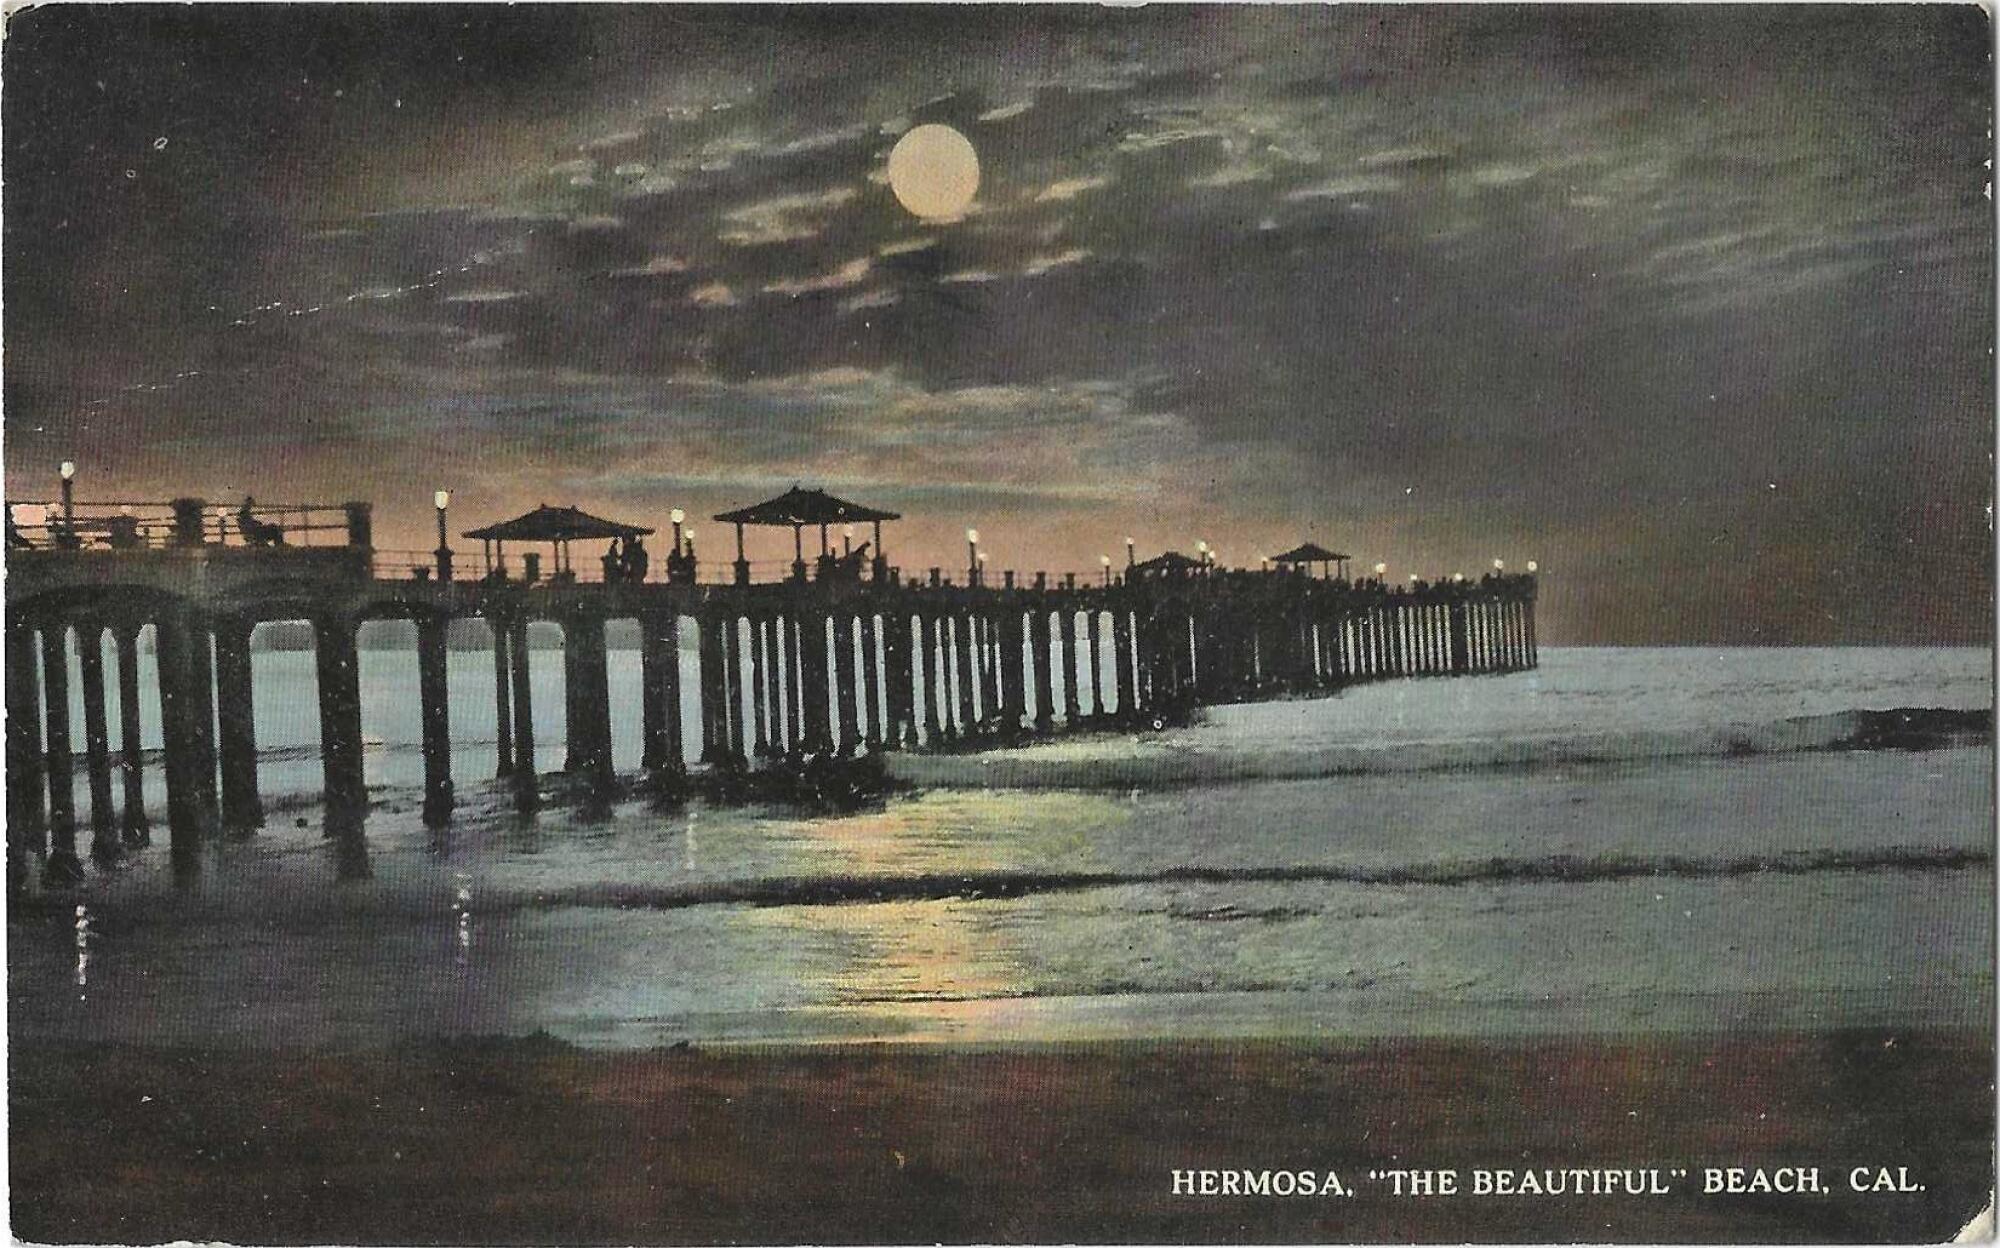 An old postcard showing a pier, with moonlight reflecting off a glassy sea.